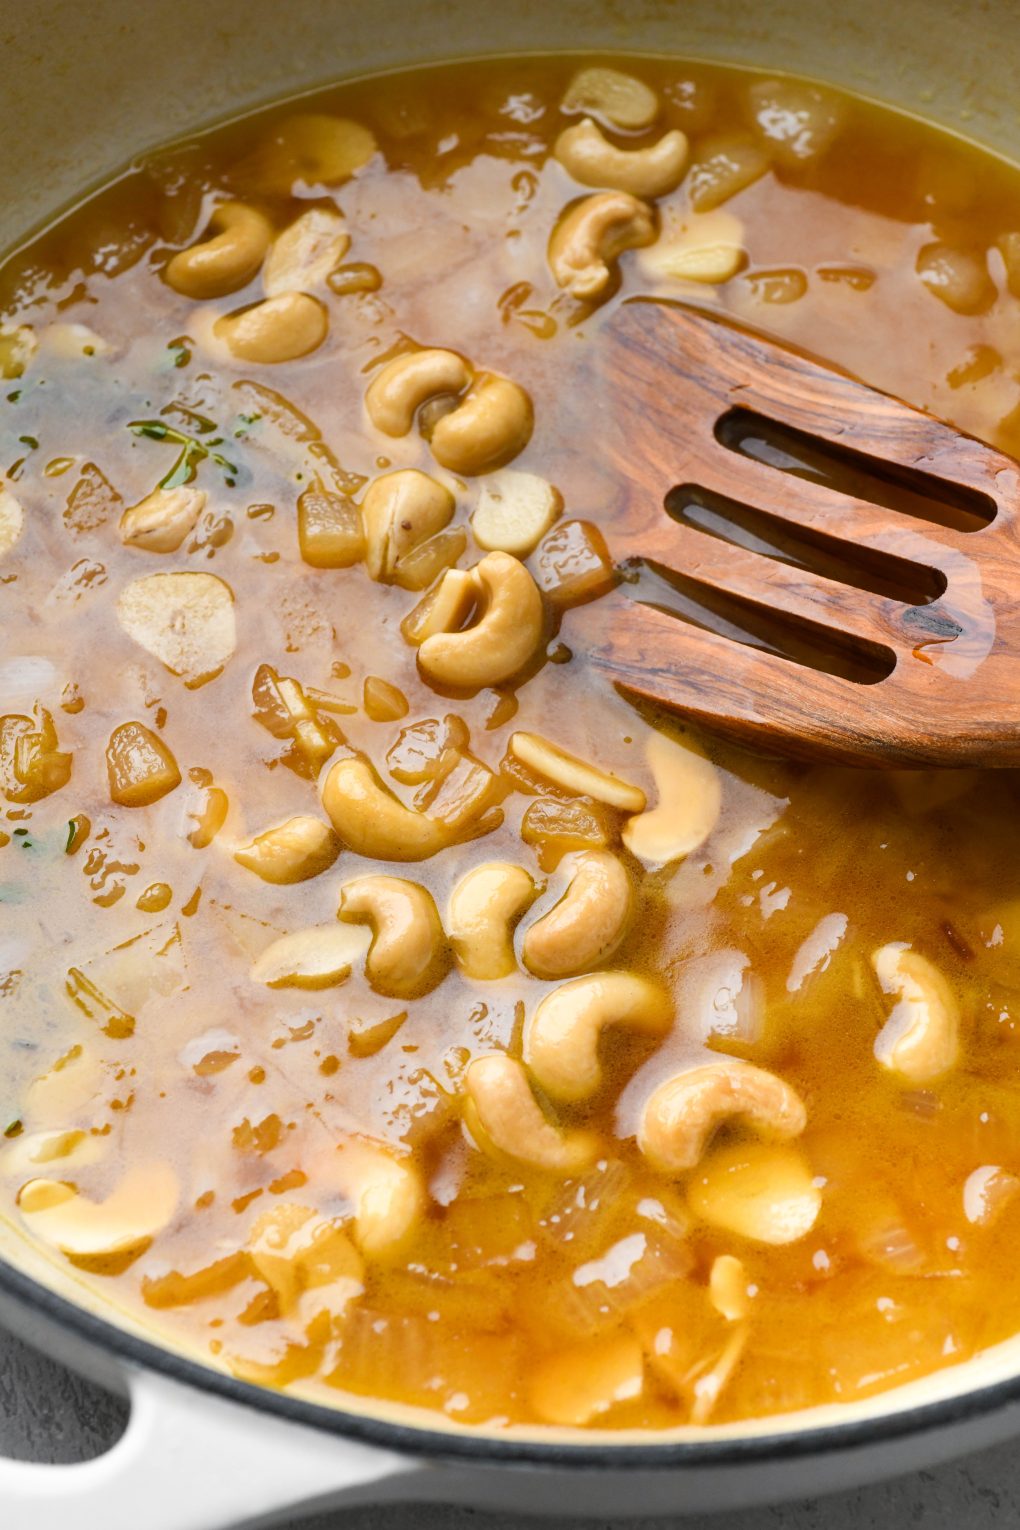 Photos showing how to make Whole30 gravy - close up image of broth reduced in skillet with diced onions, raw cashews, and fresh thyme.